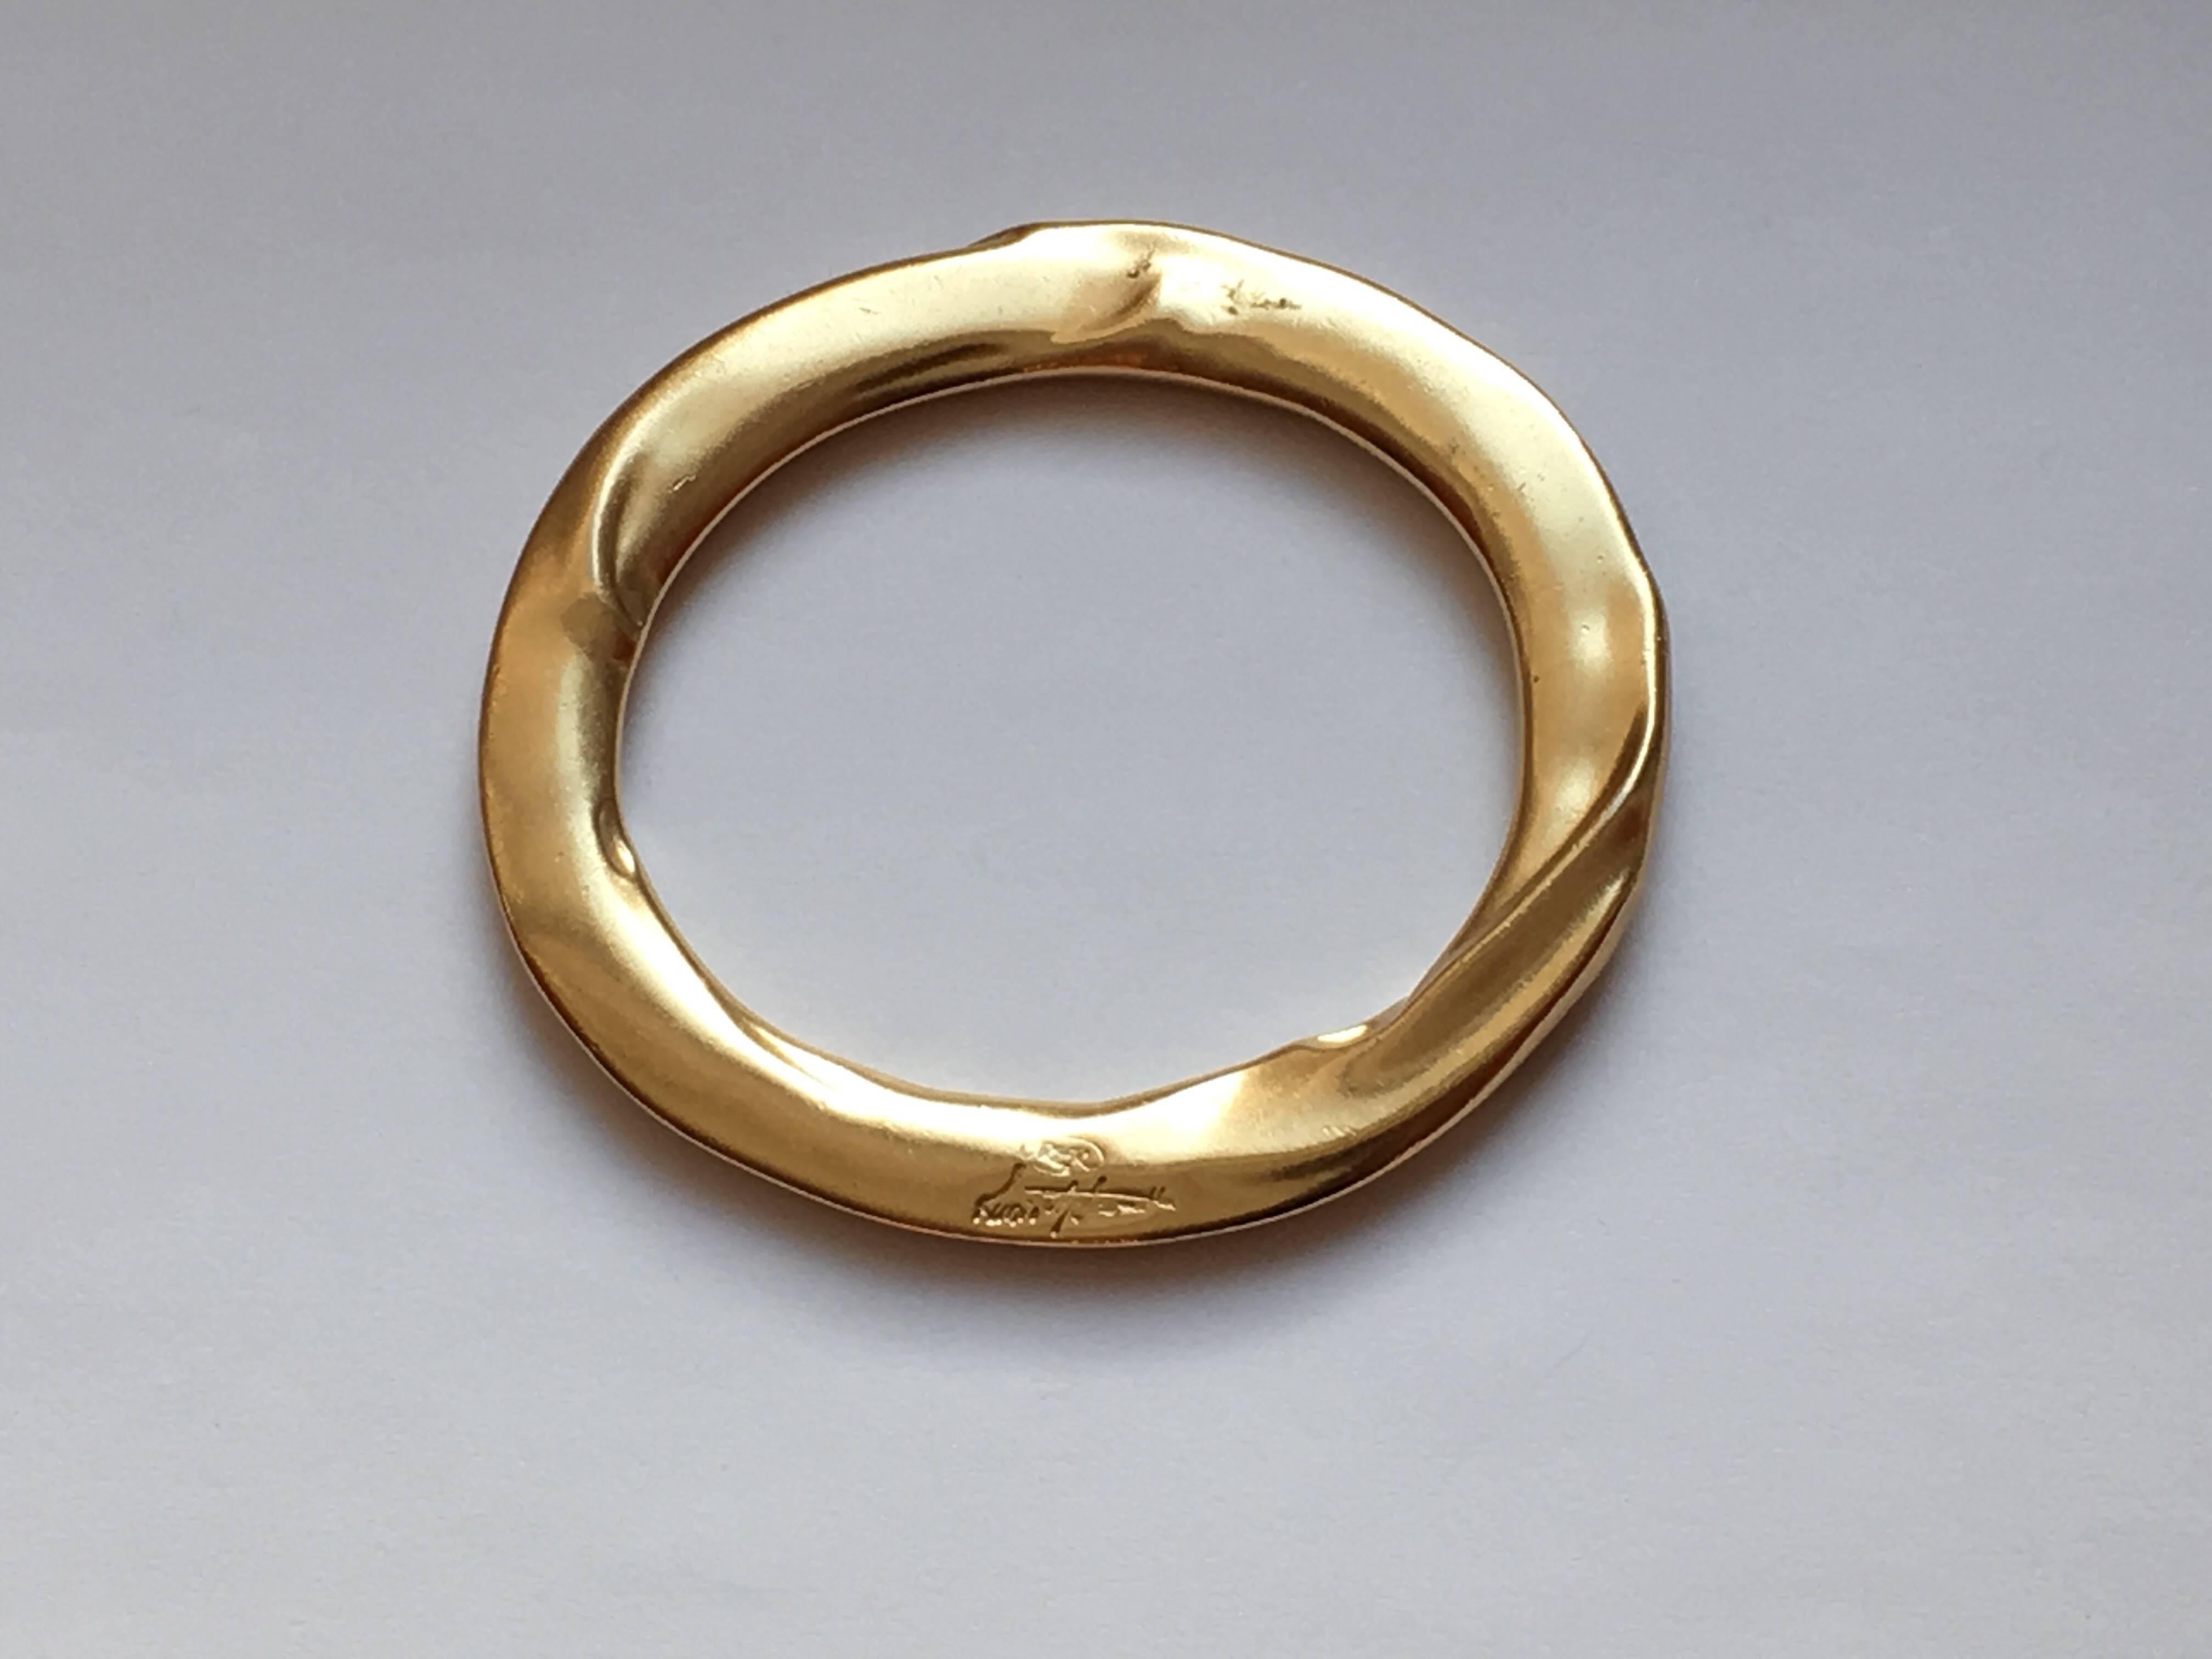 Goldtone Modernist bracelet designed by Kunio Matusmoto for Trifari. Matsumoto was a Japanese architect who designed jewelry for Trifari in the late 1970s. His pieces have a very sculptural quality to them. The bracelet's opening measures 2 1/2